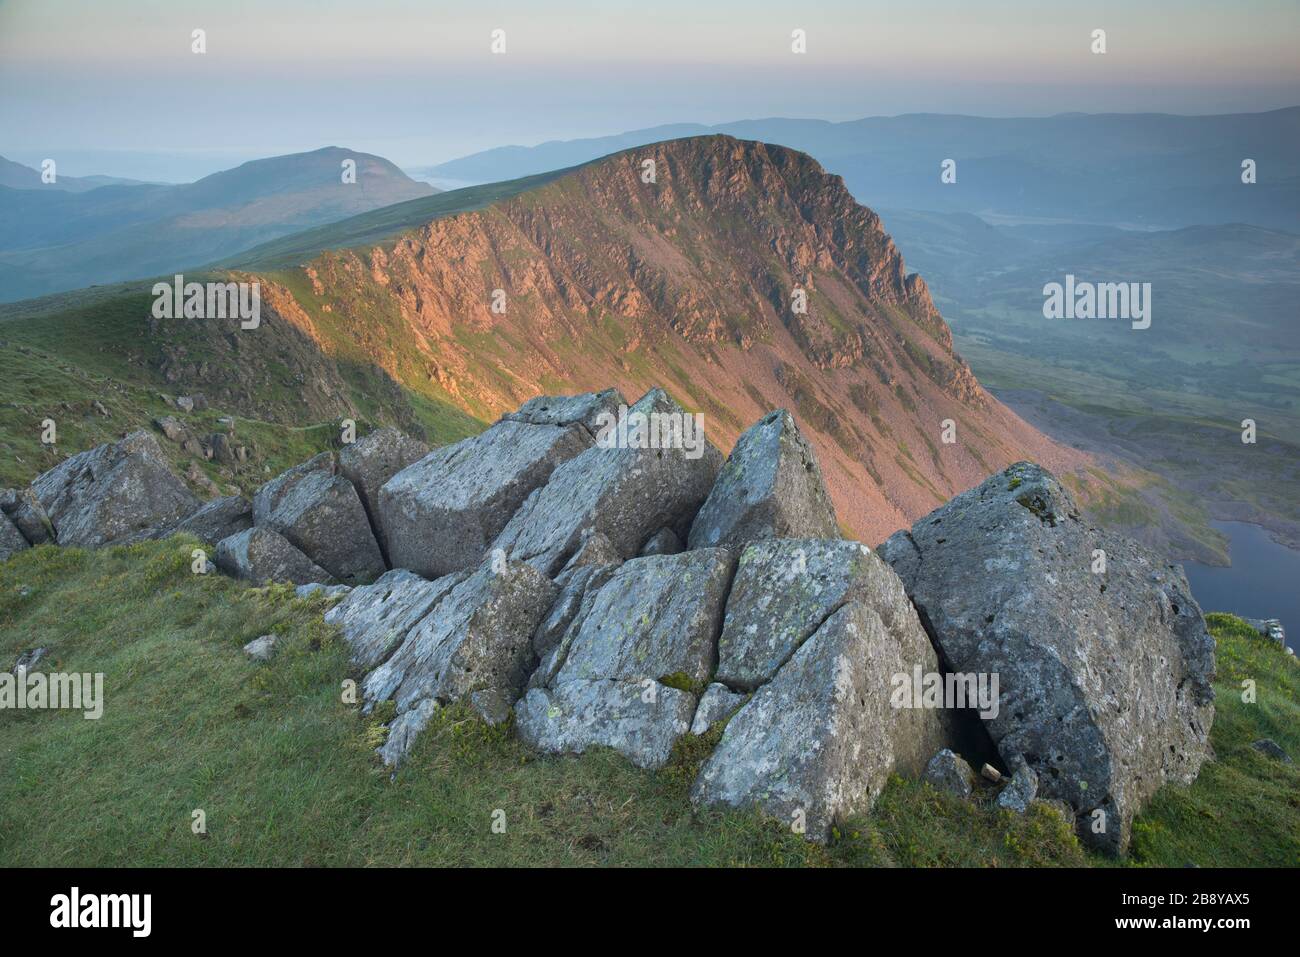 Wide views in lovely warm light near the summit of Cadair Idris, a high mountain near Dolgellau in North Wales, UK. Stock Photo